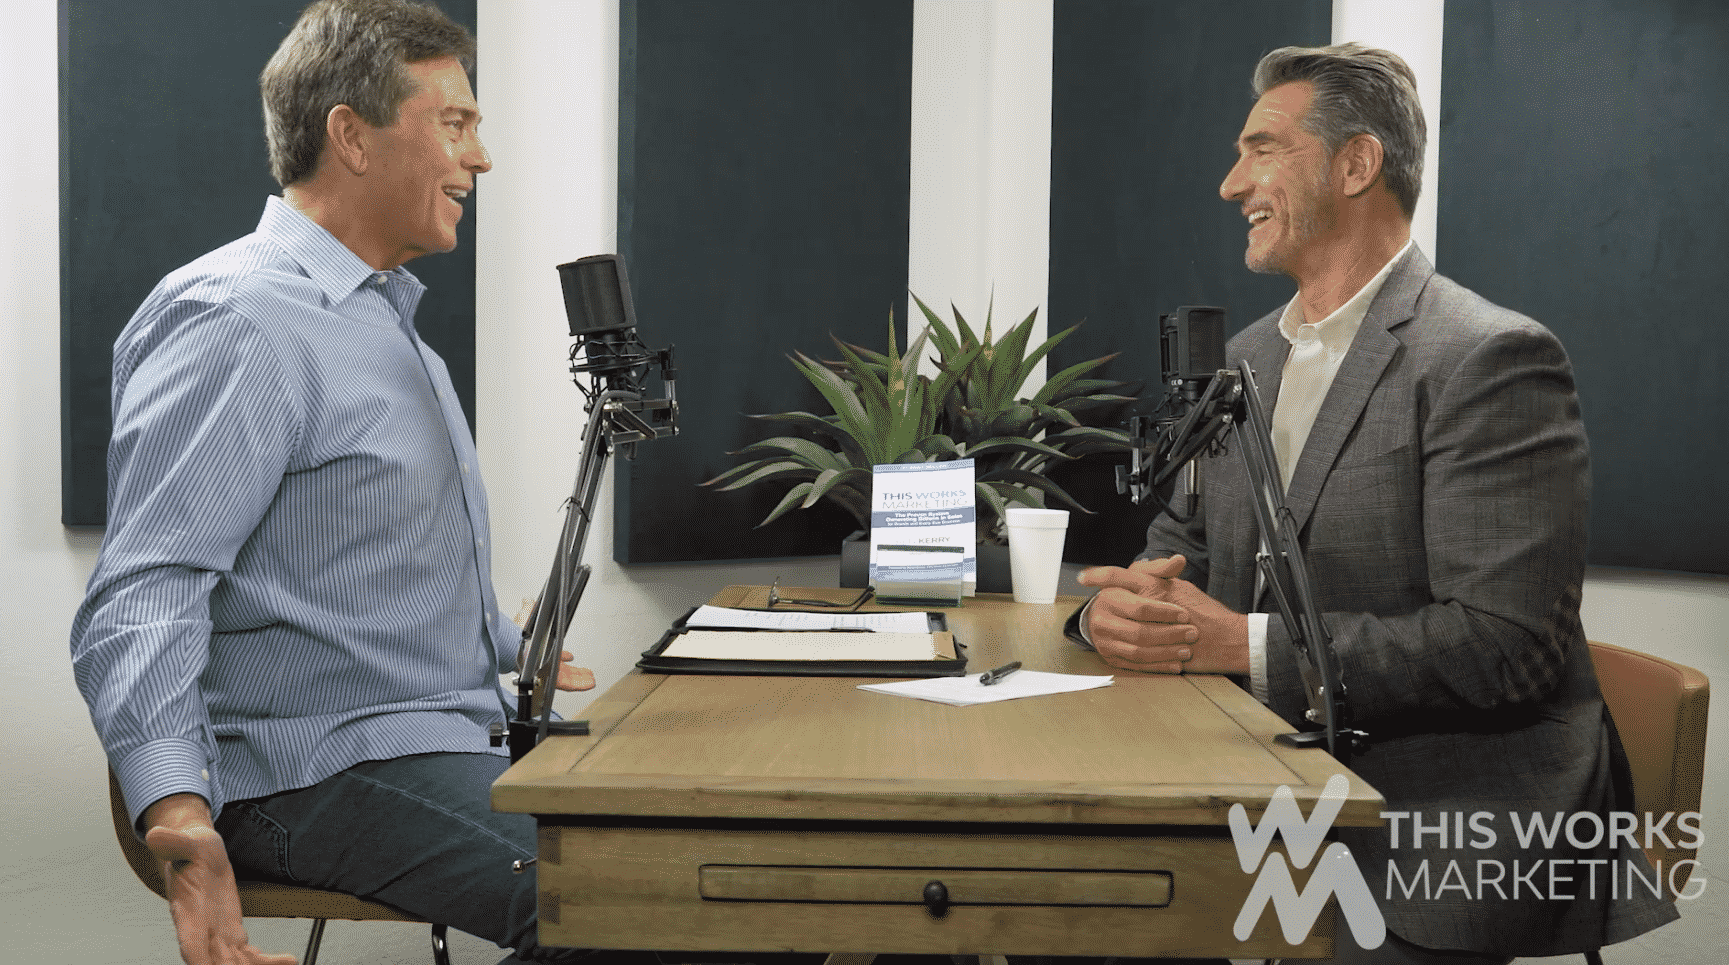 Ken Kerry Interviews Greg Cynaumon, Founder/CEO of Adcology